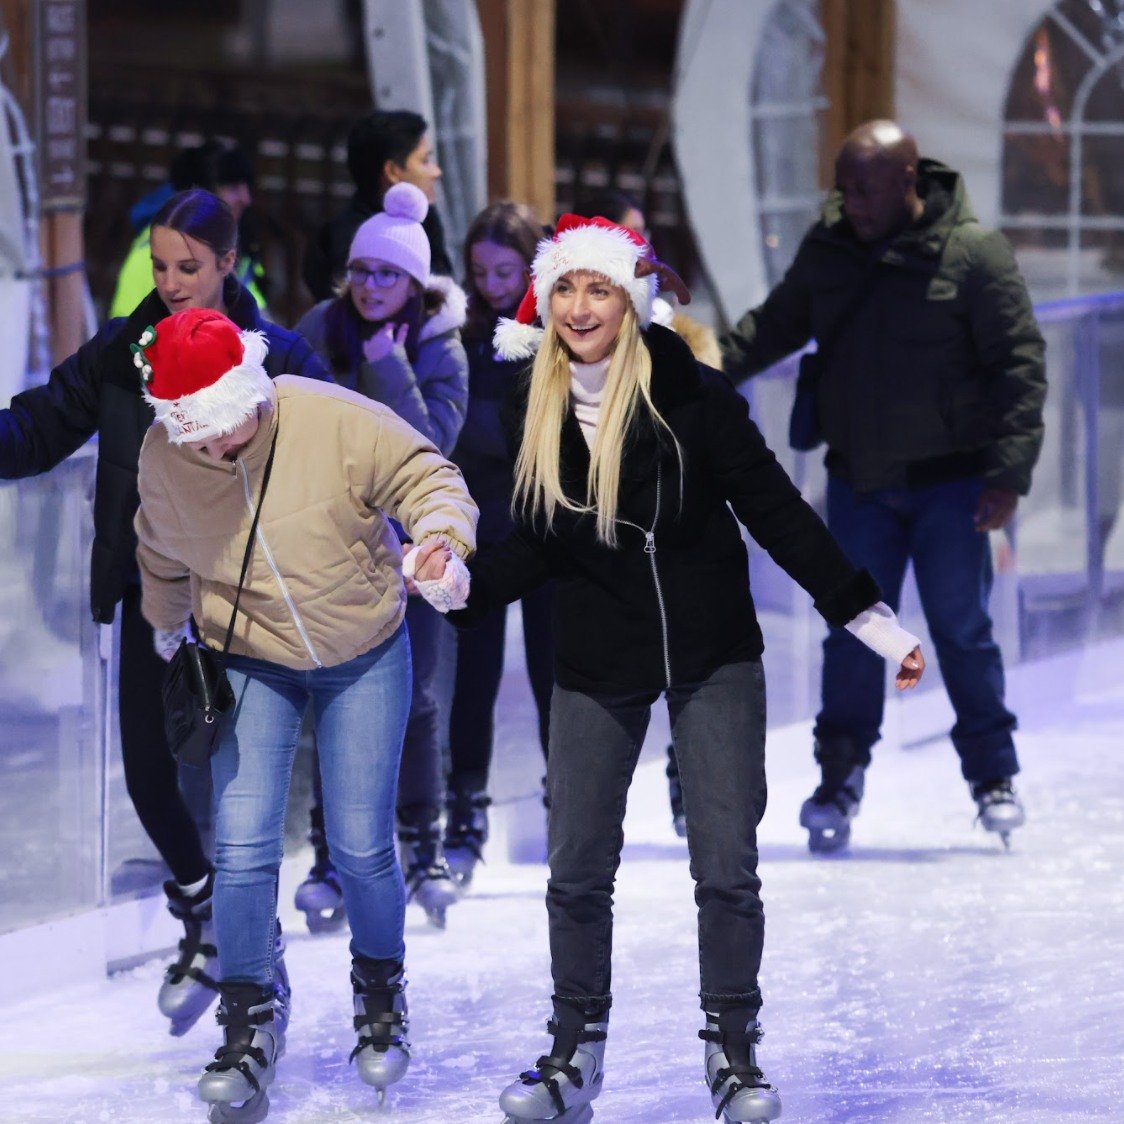 2024 2025 Kent and Kentish Christmas Activities Lights Events and Experiences - Bluewater's Christmas lights, ice rink, and Winterland come together to offer a festive for families, friends, and kids